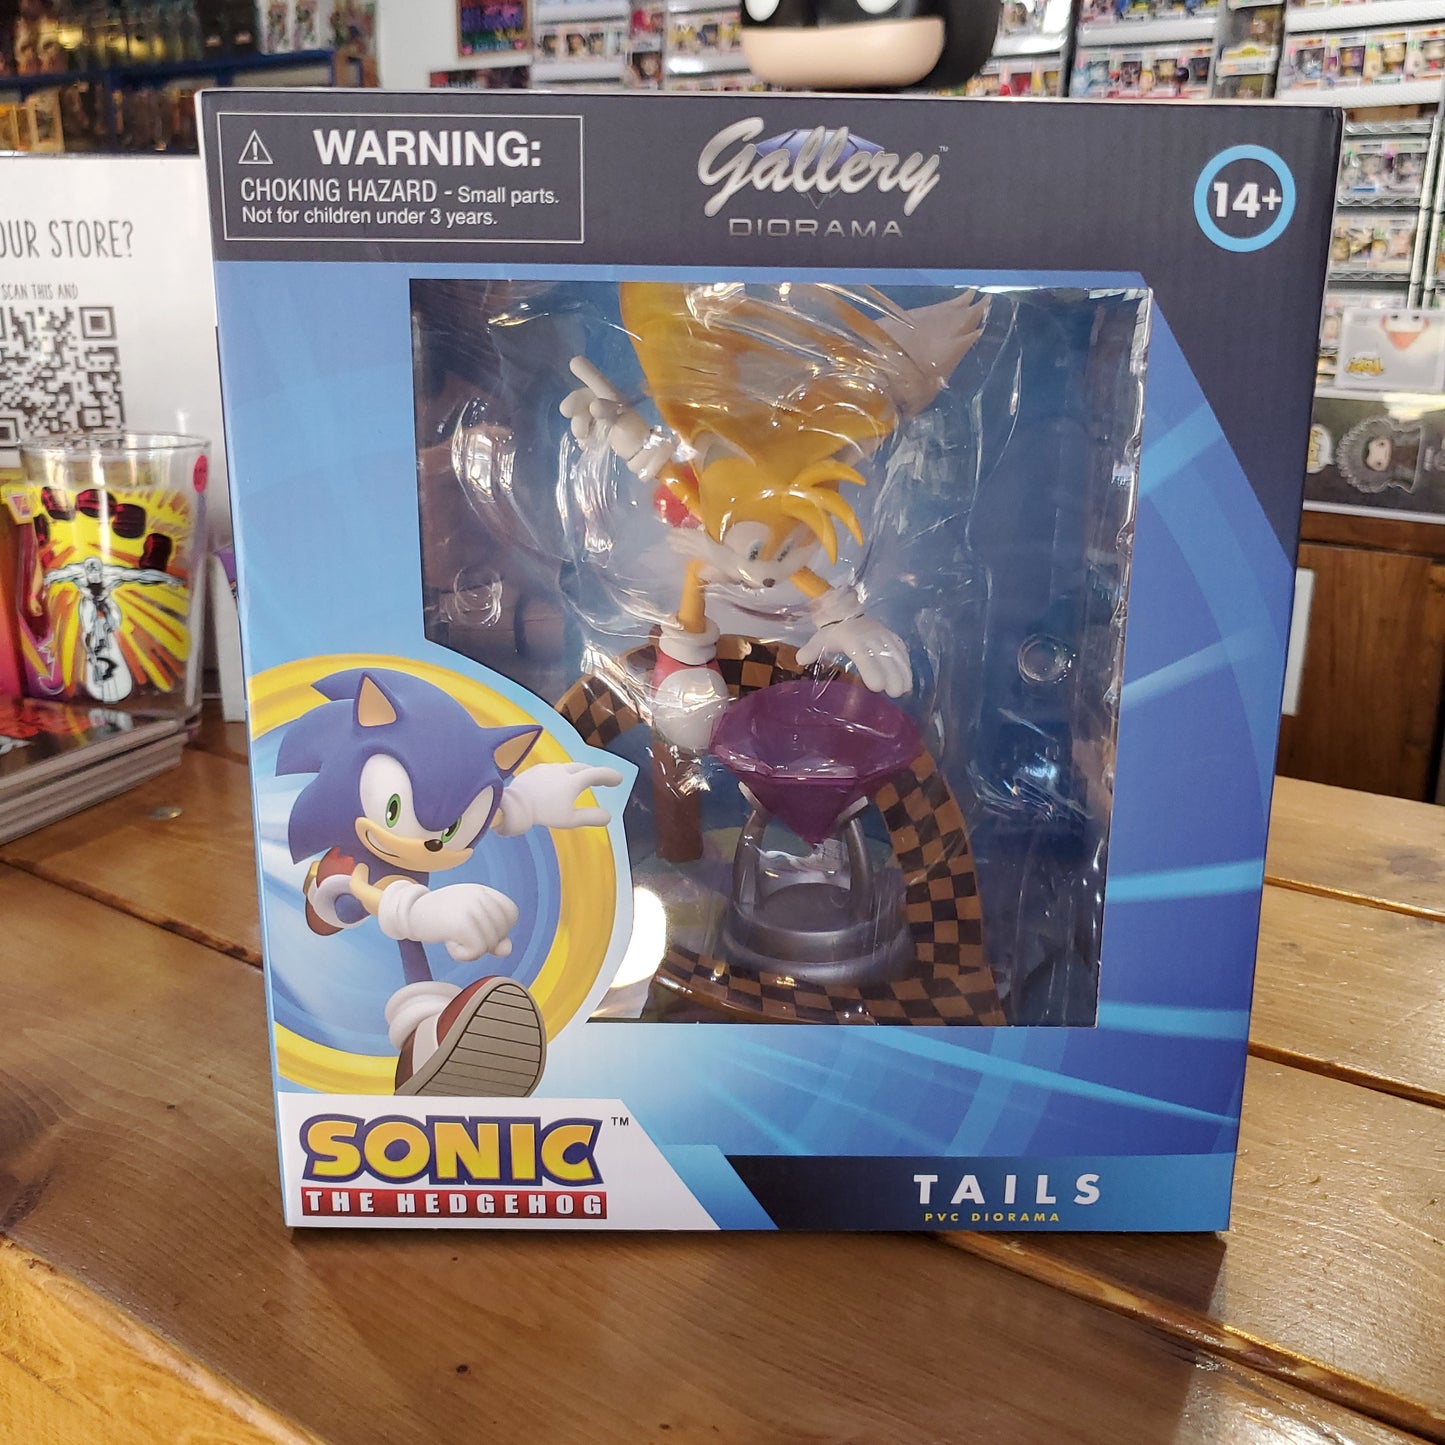 Sonic the Hedgehog - Tails PVC Diorama (video games)